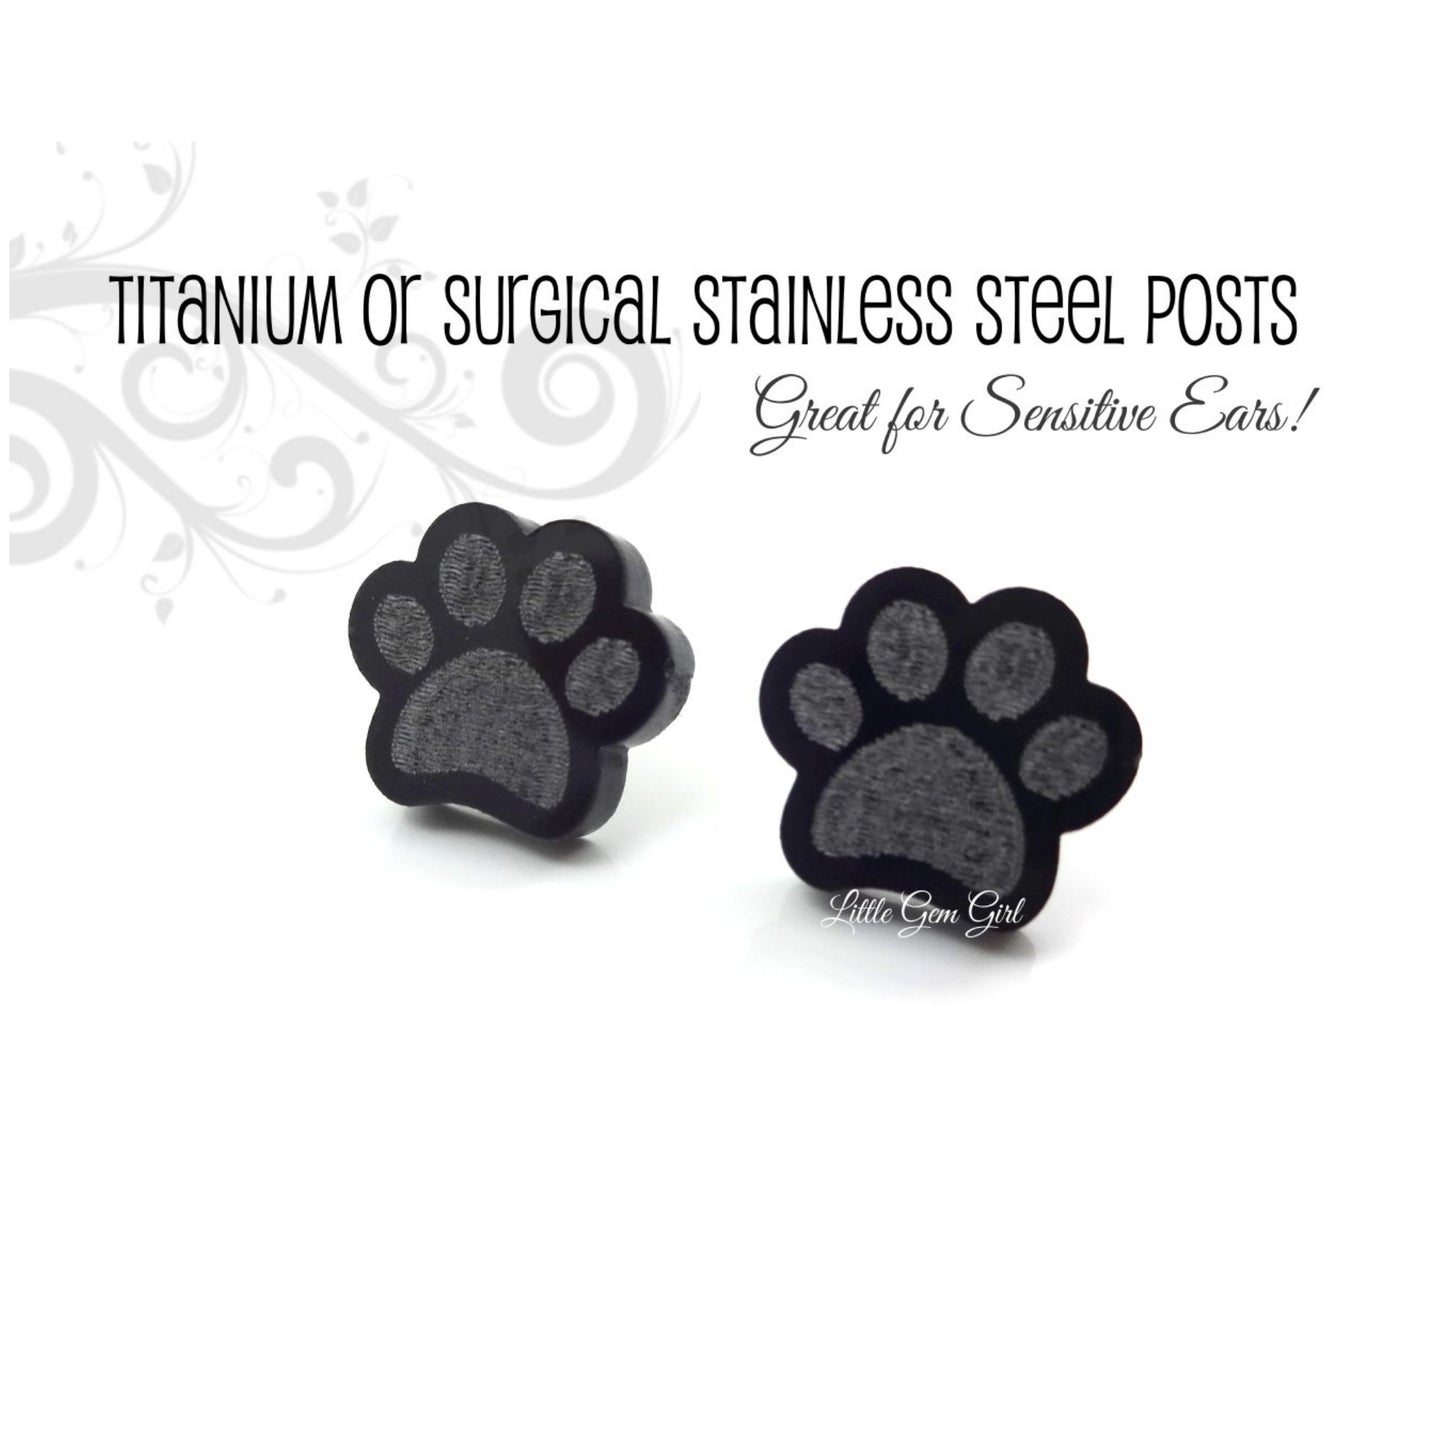 Paw Print Earrings Available with Titanium or Stainless Steel Post - Animals, Dog, Cat Black Pawprint Stud Earrings